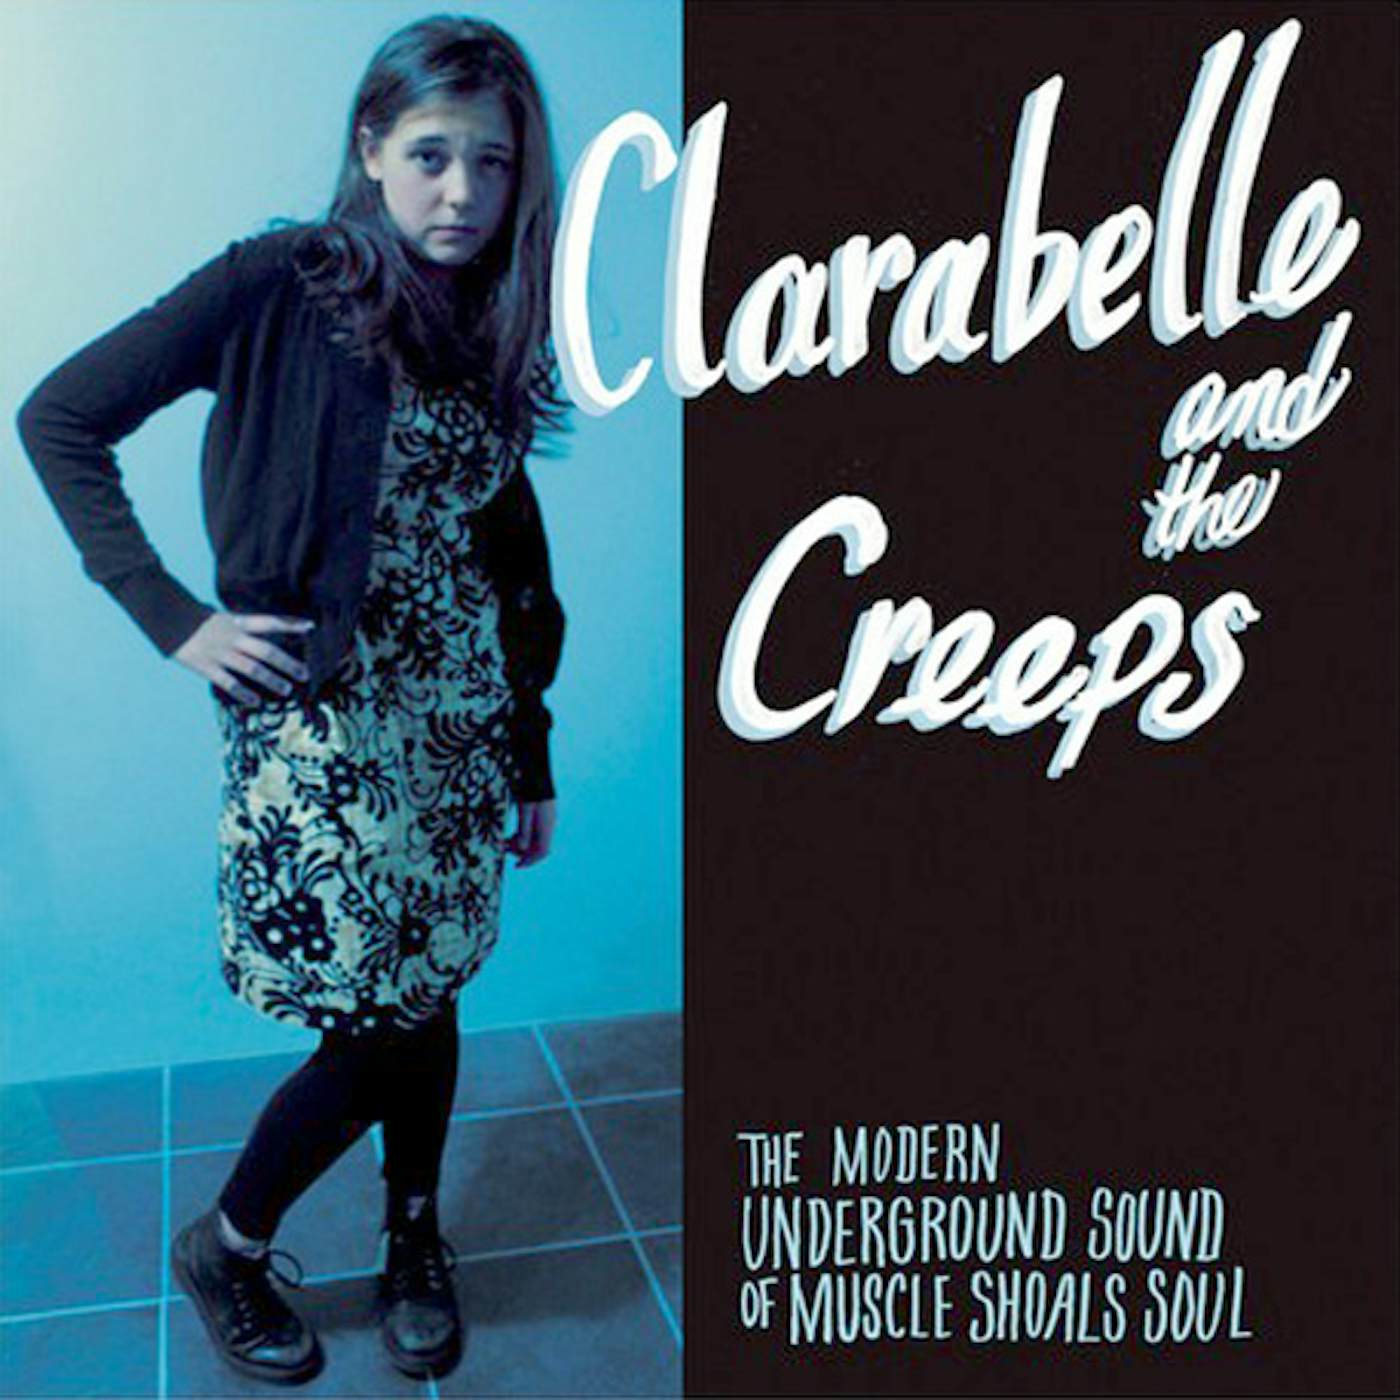 Clara Belle and the Creeps MODERN UNDERGROUND SOUND OF MUSCLE SHOALS SOUL Vinyl Record